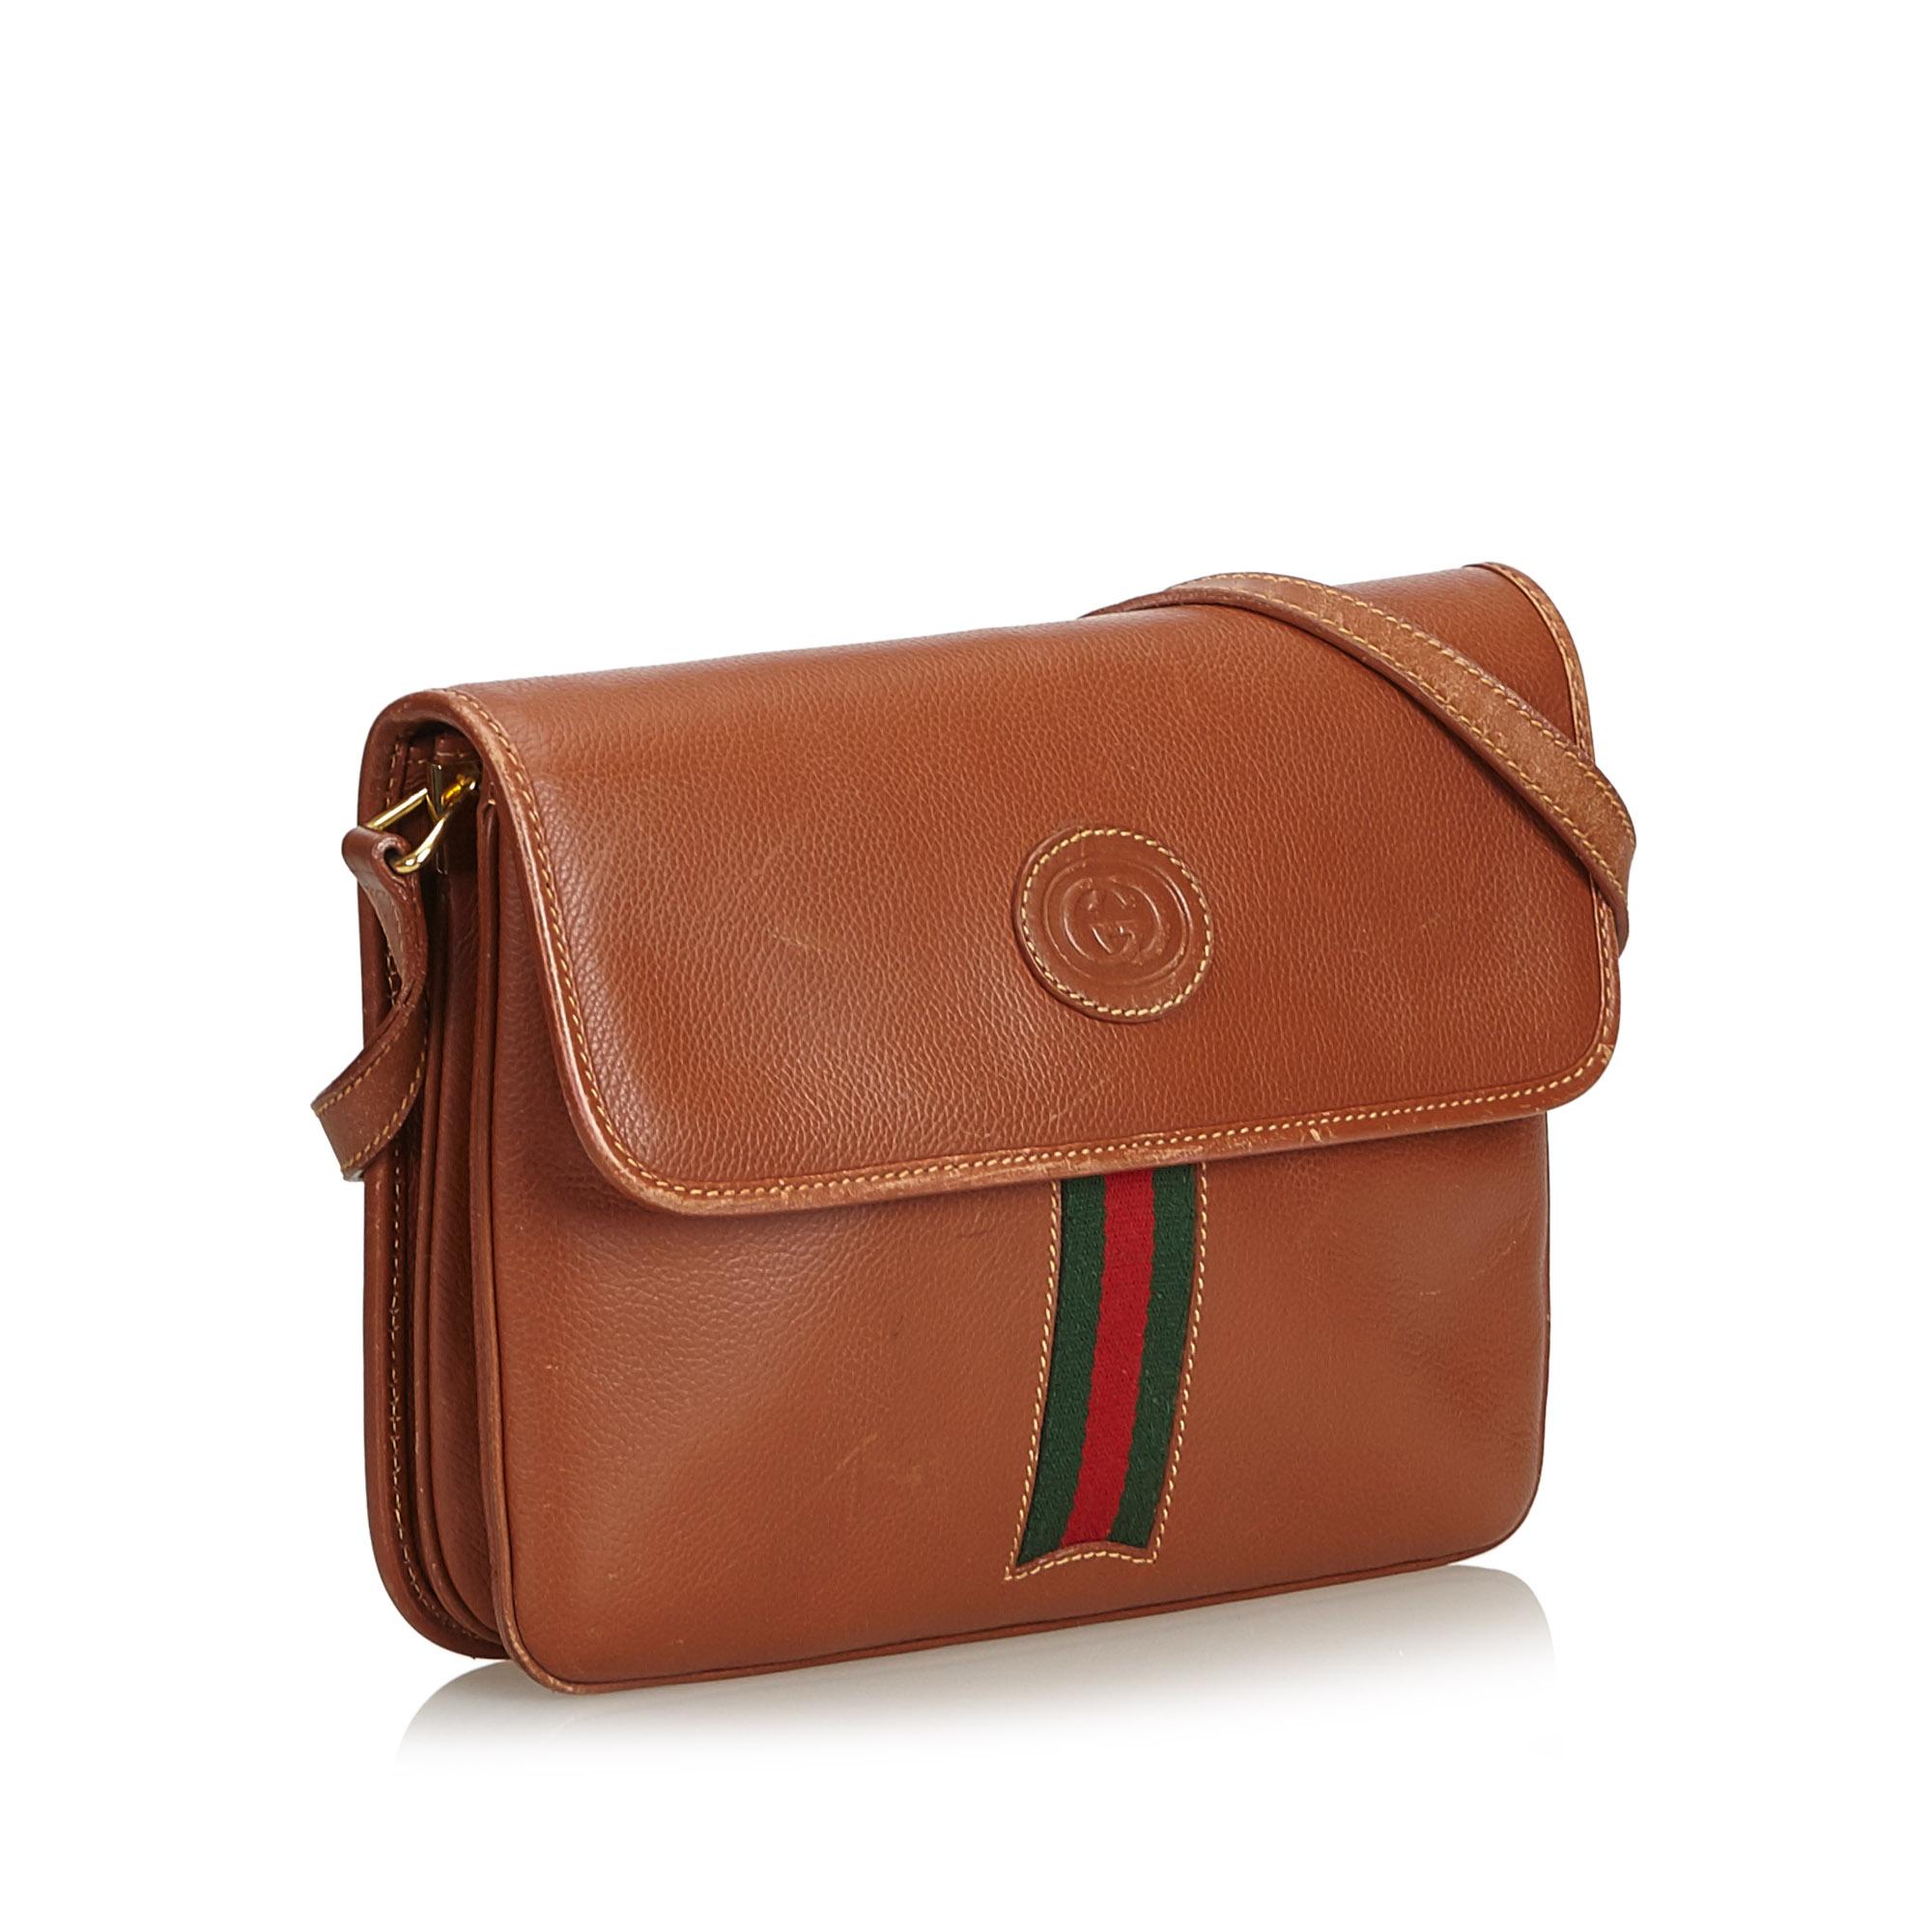 This crossbody bag features a leather body, flat leather crossbody strap, flap with magnetic closure, three interior compartments, and an interior zip pocket. It carries as B condition rating.

Inclusions: 
This item does not come with